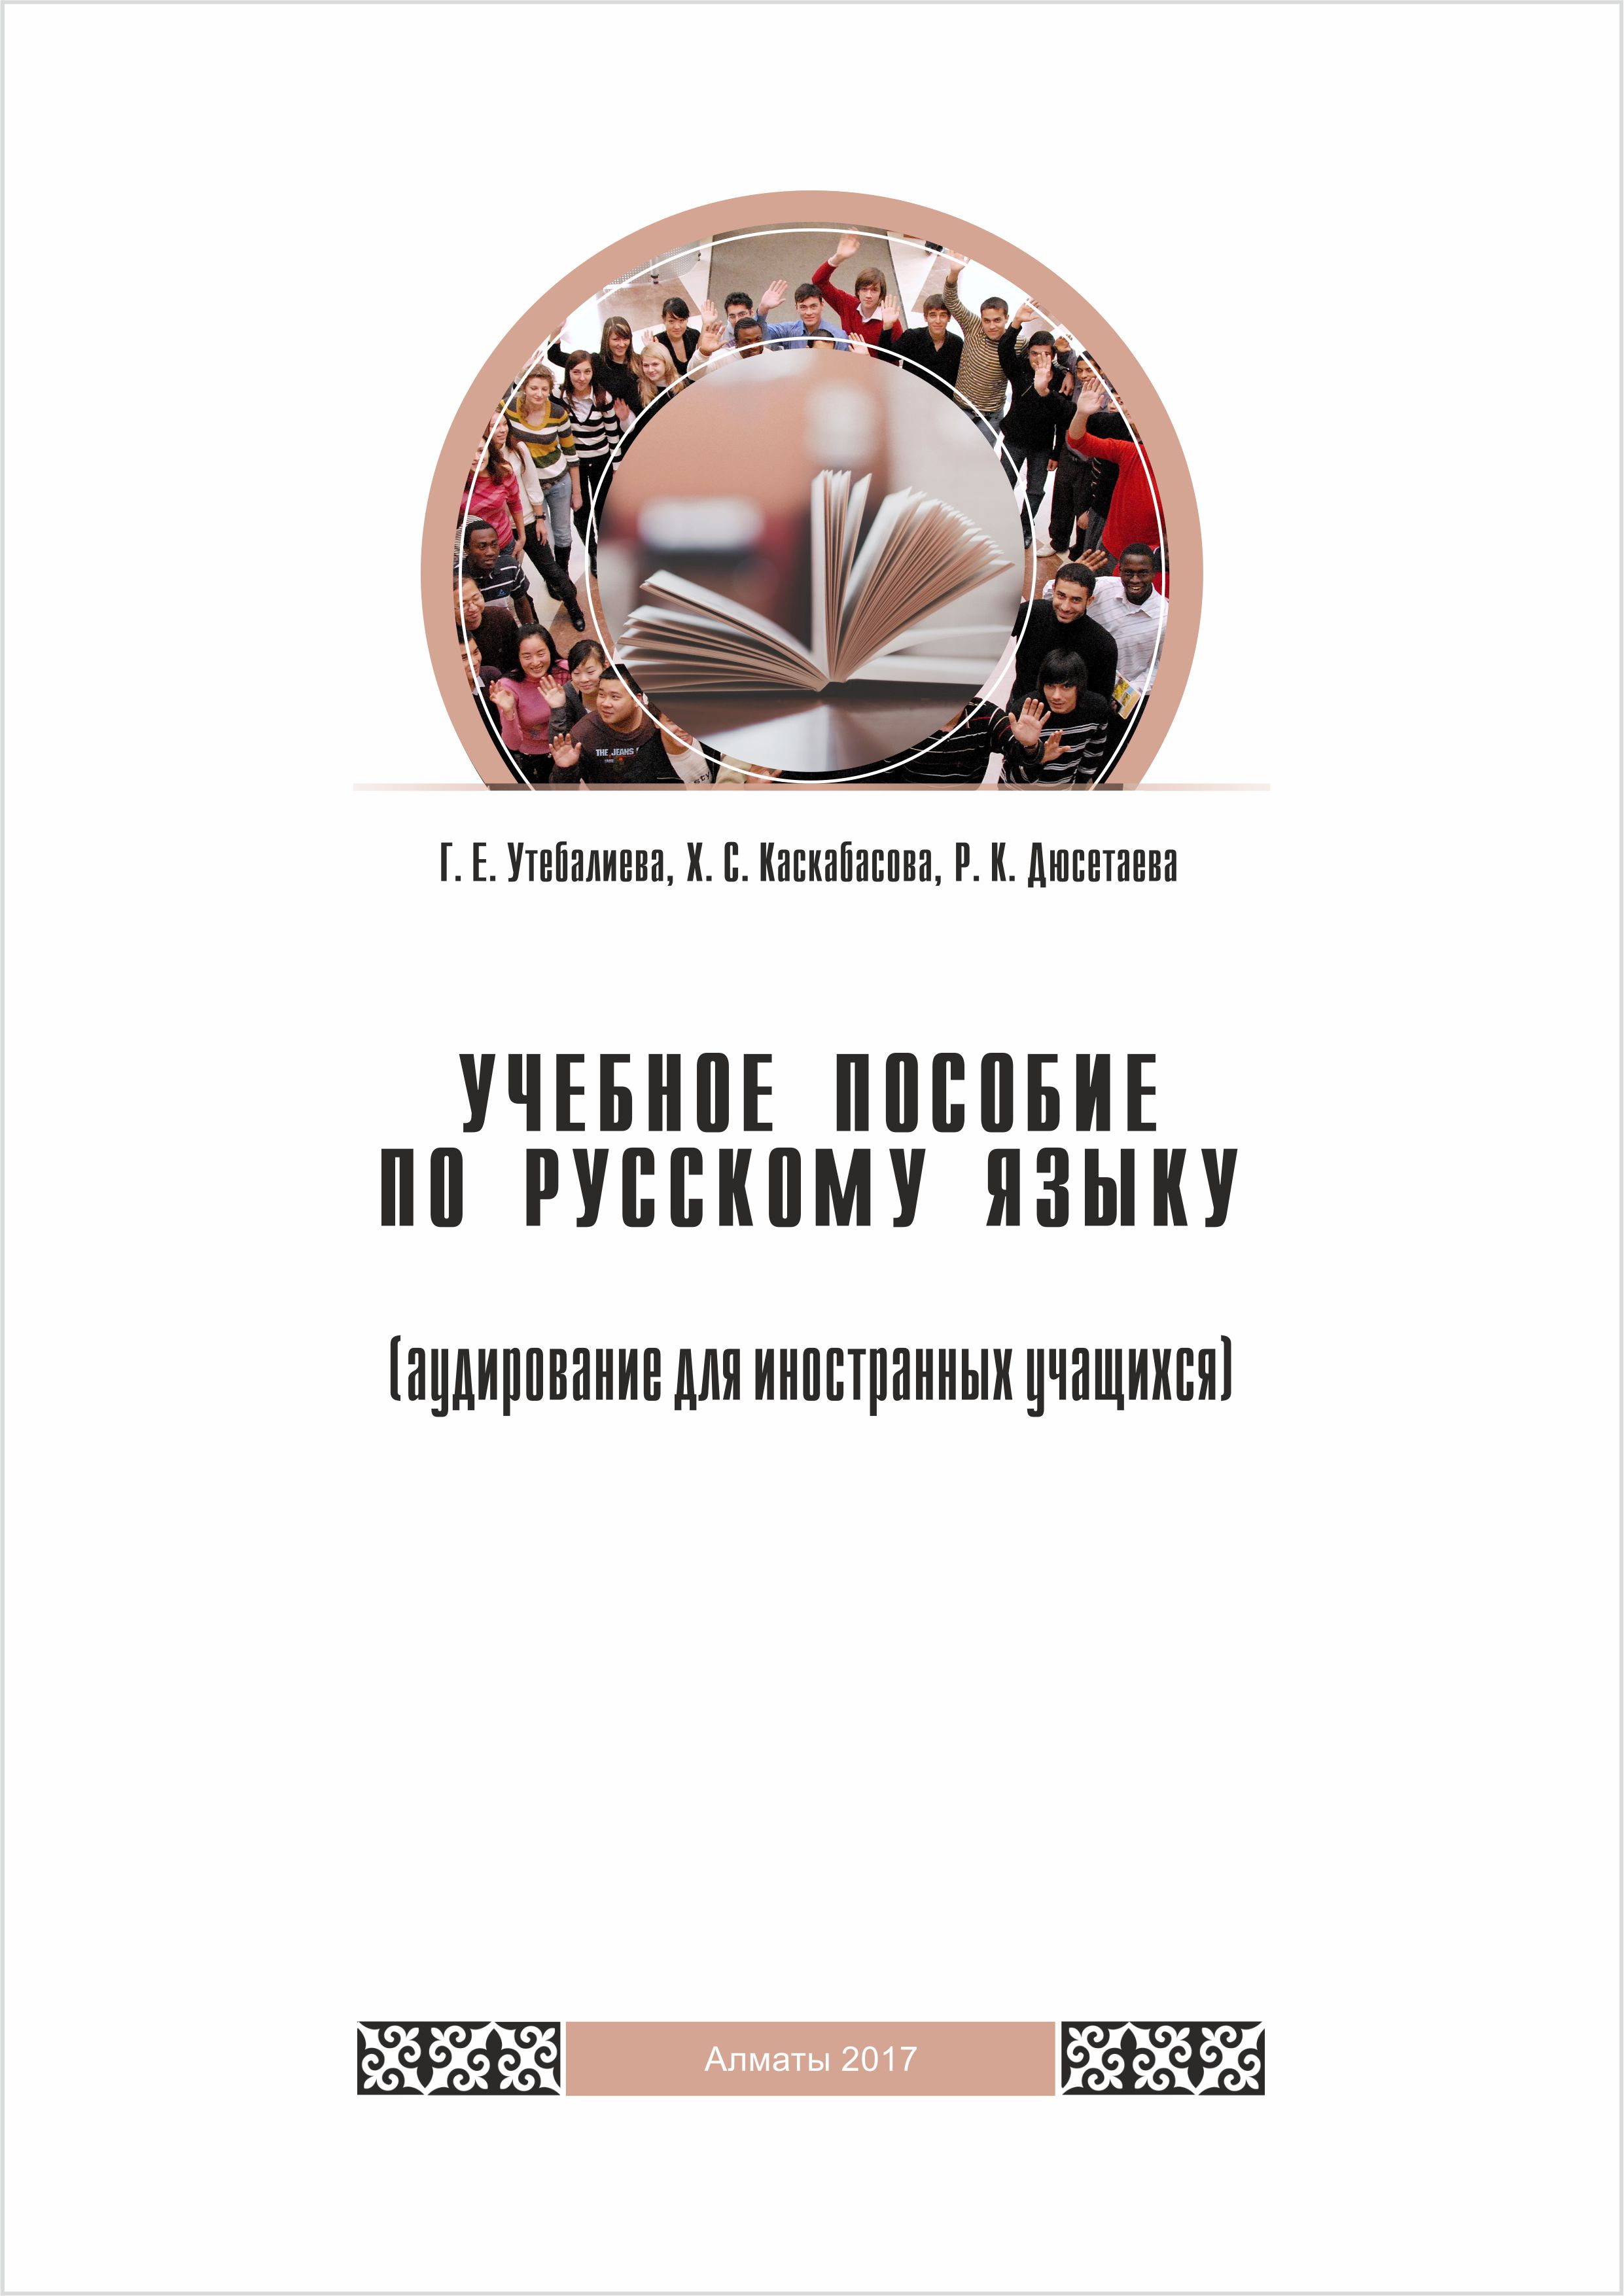 Study guide for the Russian language (listening for foreign students) - 92 p.